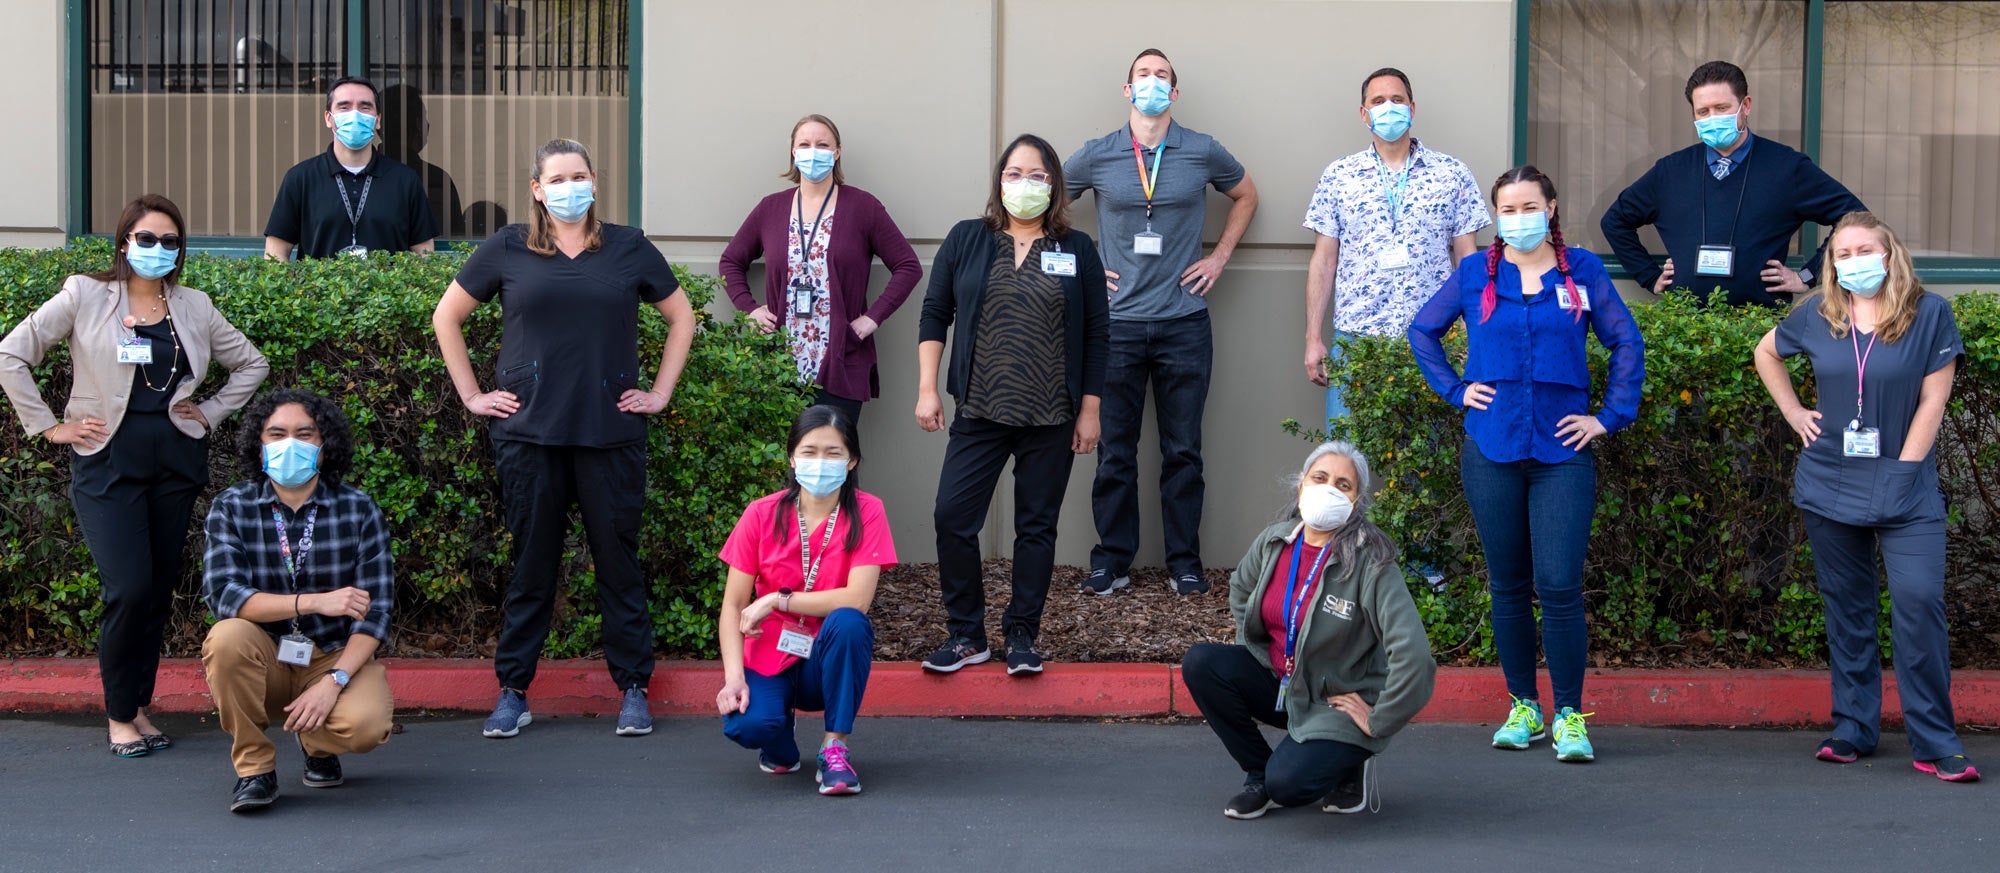 Specialty Testing Center Lab team, masked, outside, group photo